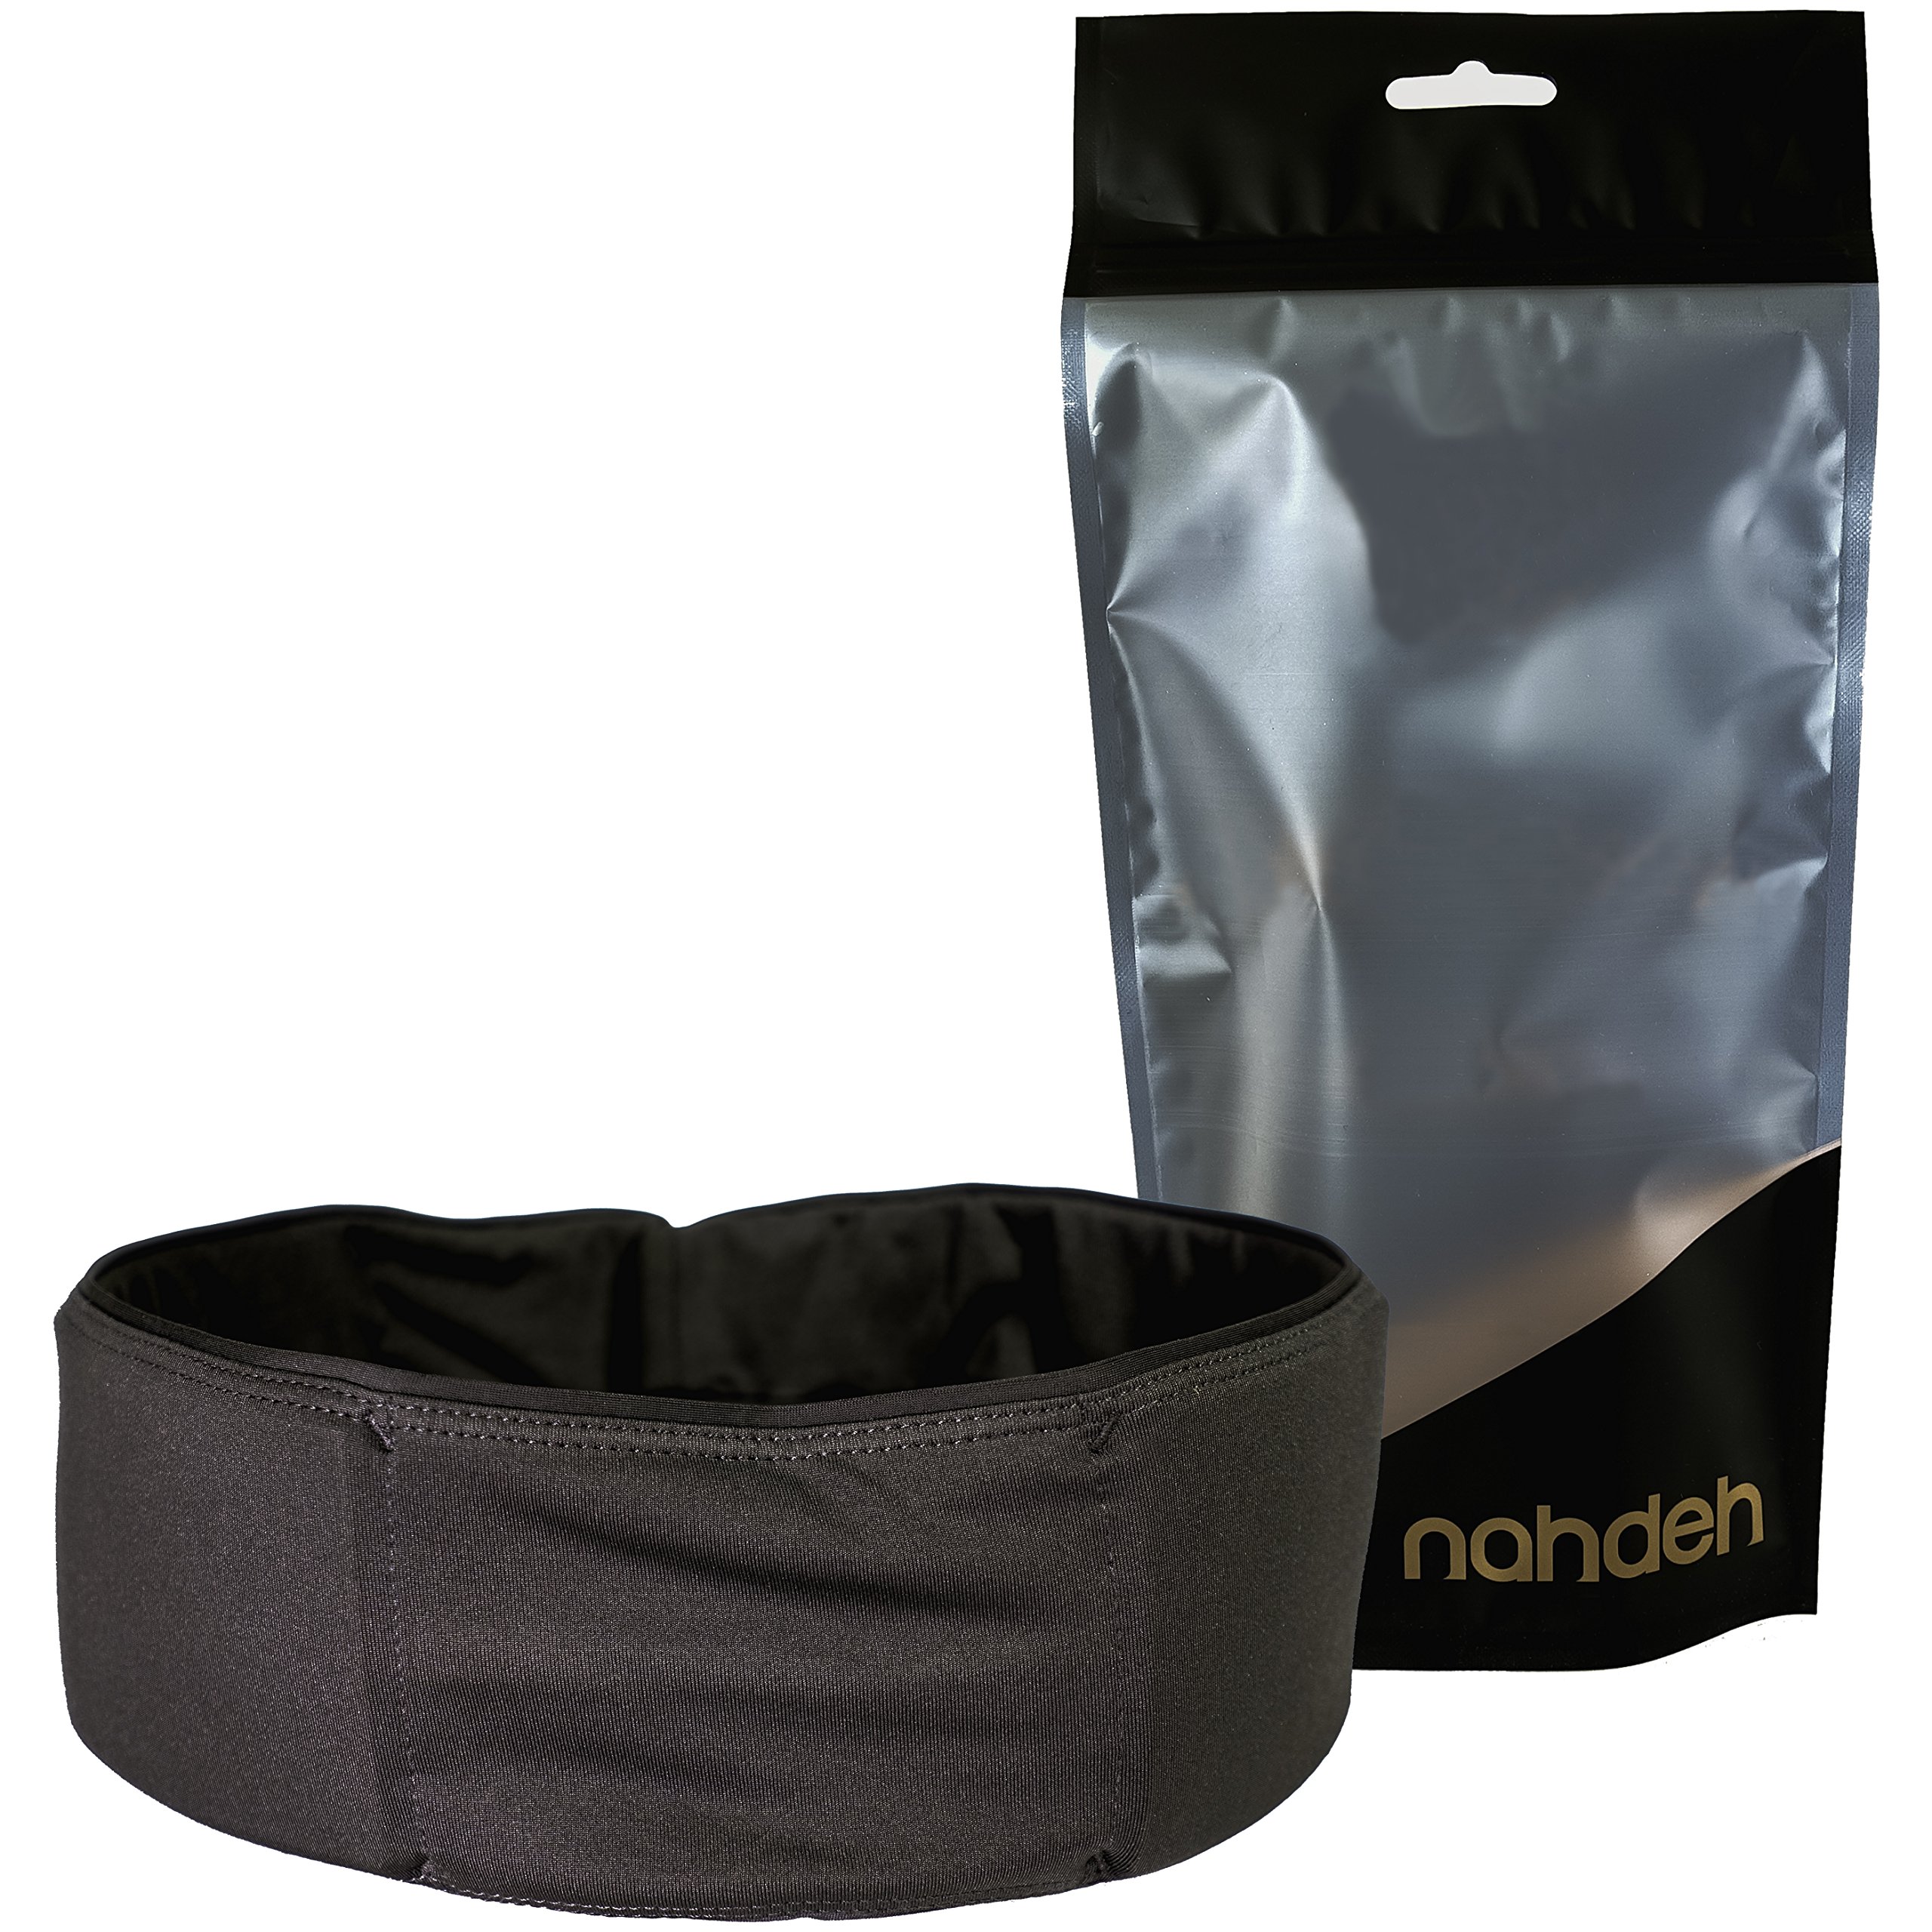 nahdeh Volleyball Diving Hip Protection - Bruisebelt (Black, X-Small 26 to 29)